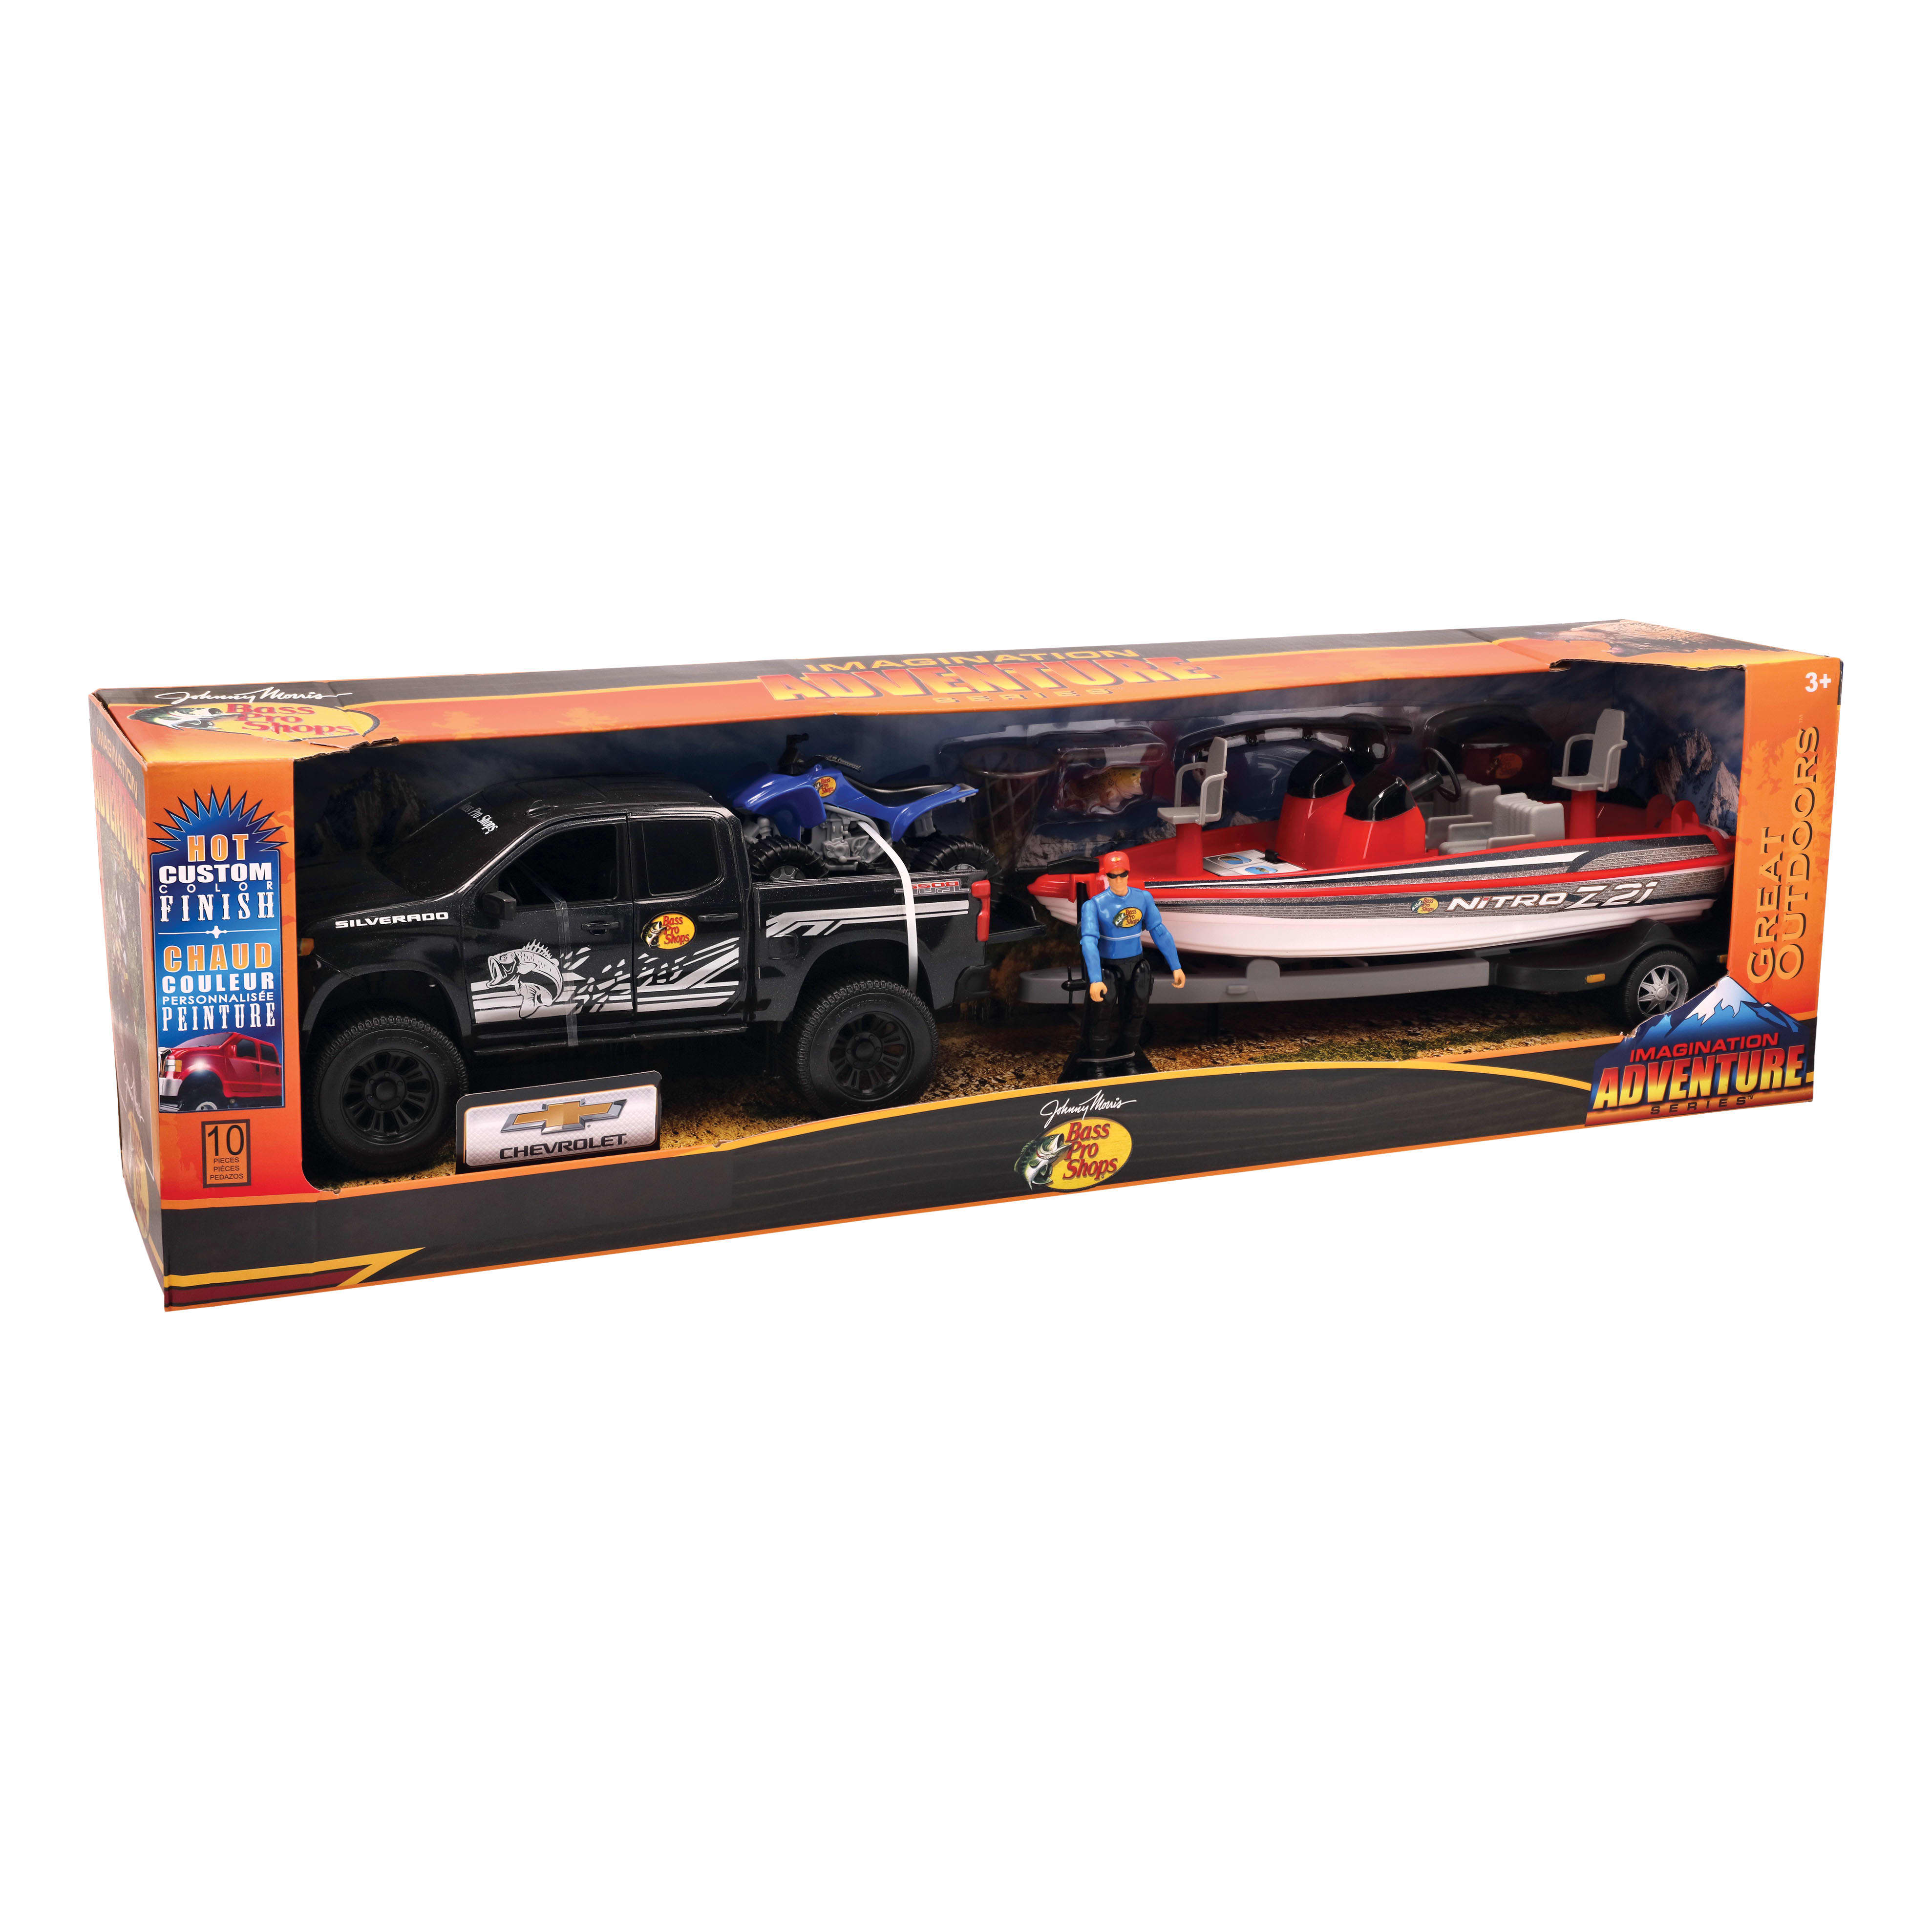 Bass Pro Shops® Imagination Adventure Chevy Silverado with Bass Boat Play  Set for Kids